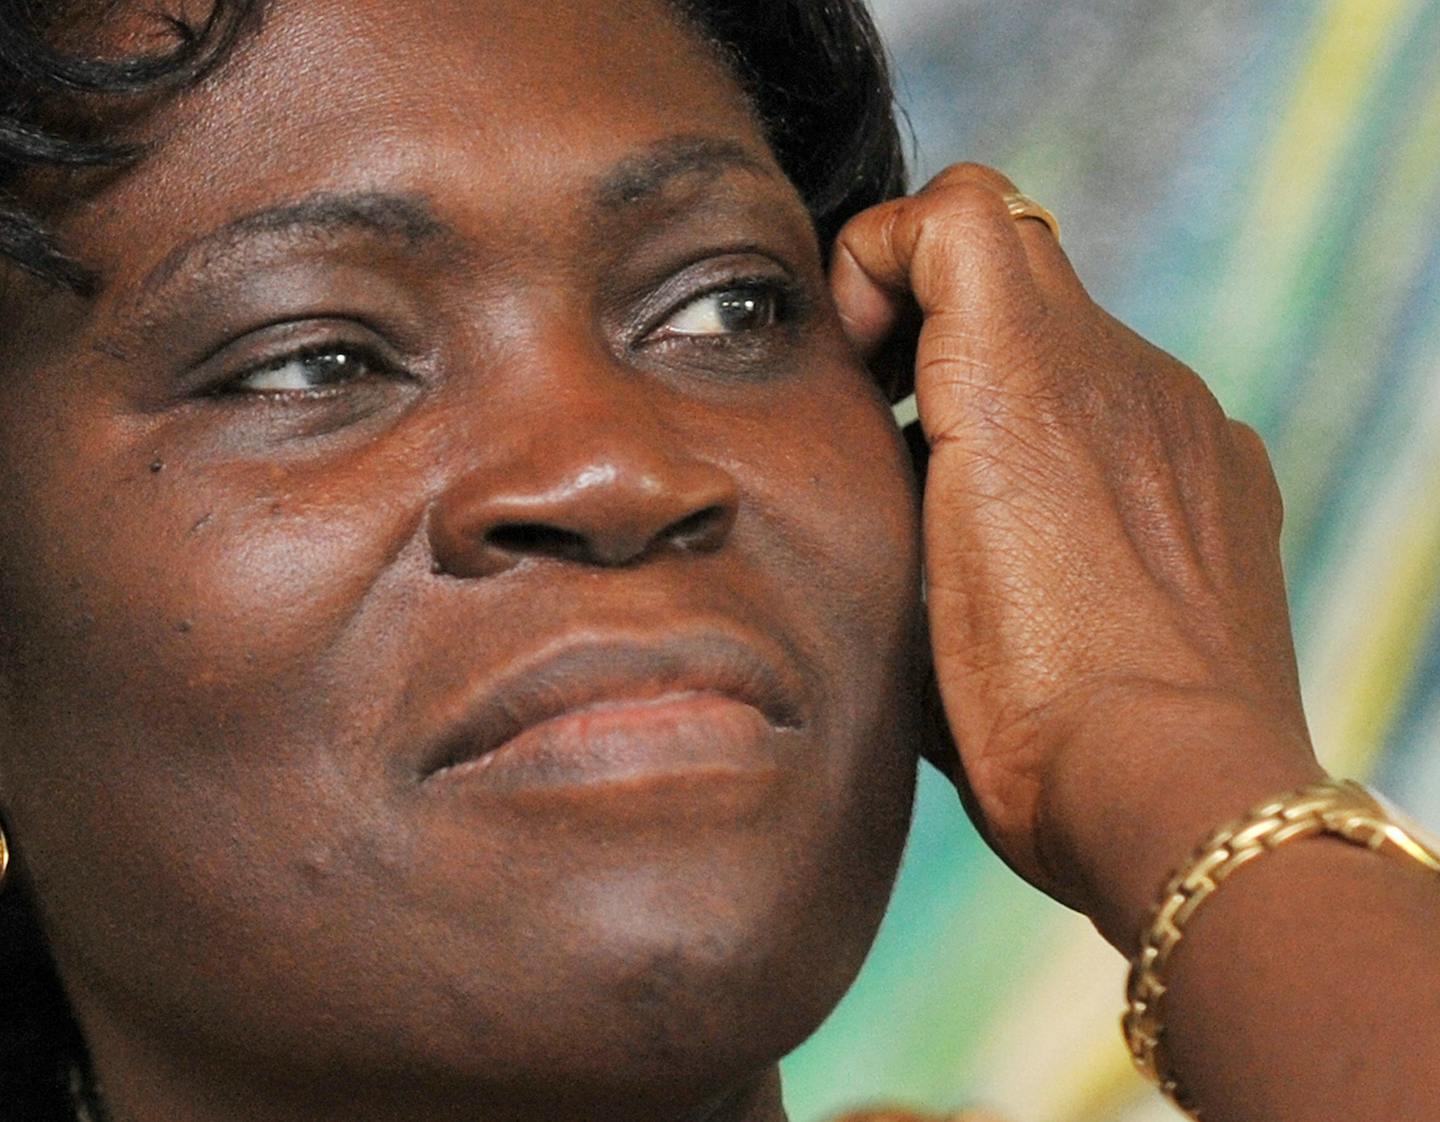 A close-up of Simone Gbagbo shows her scratching her face.